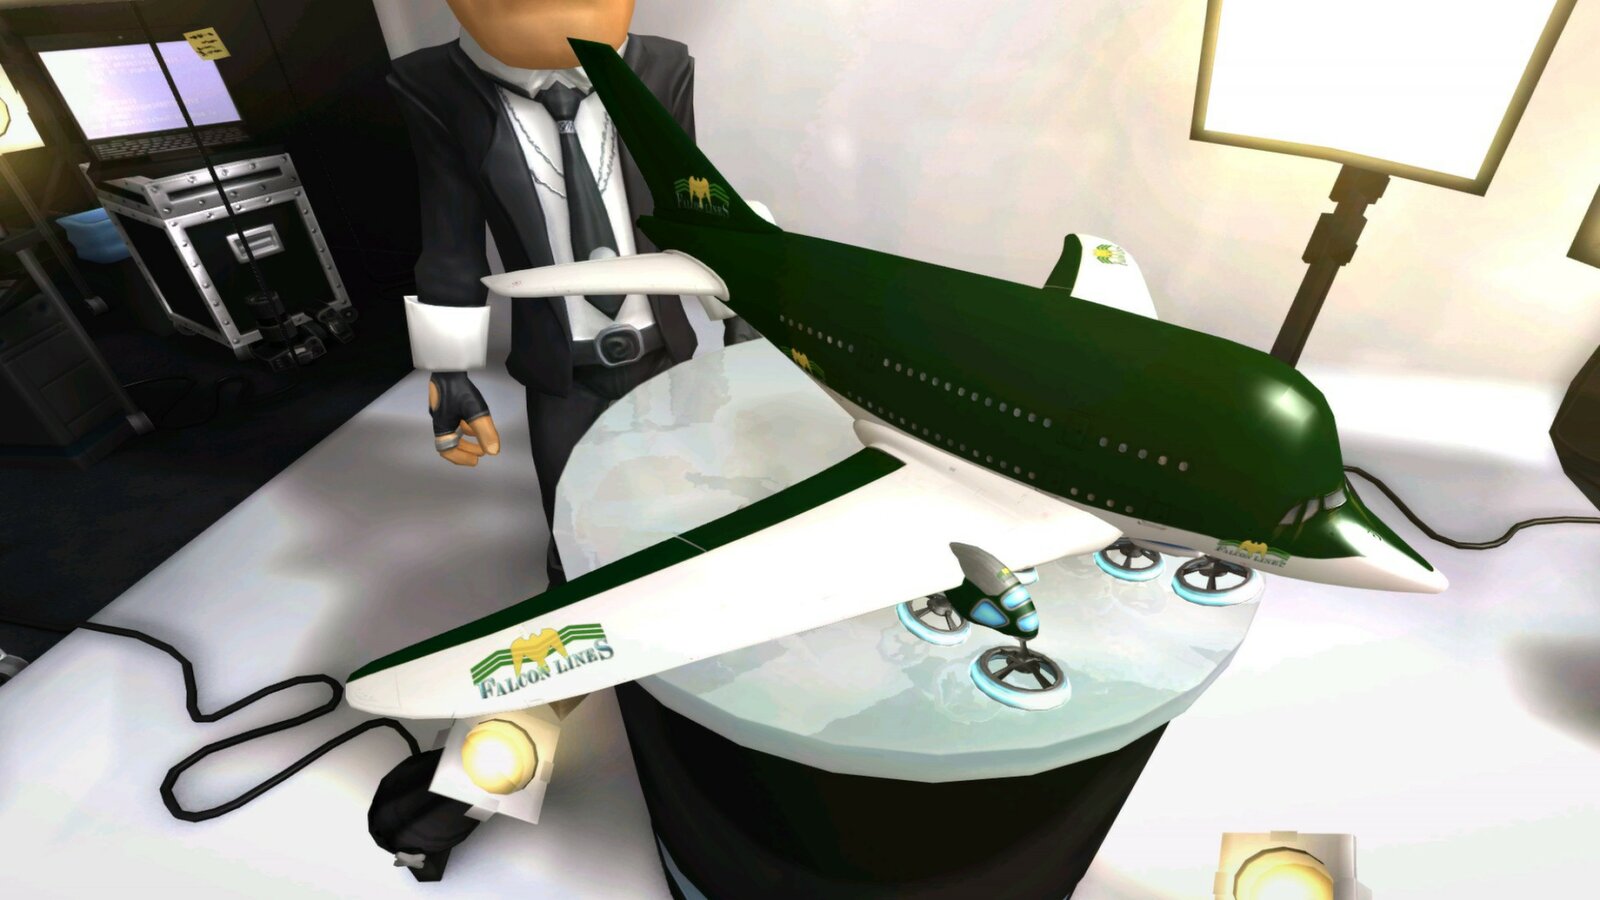 Airline Tycoon 2: Falcon Airlines